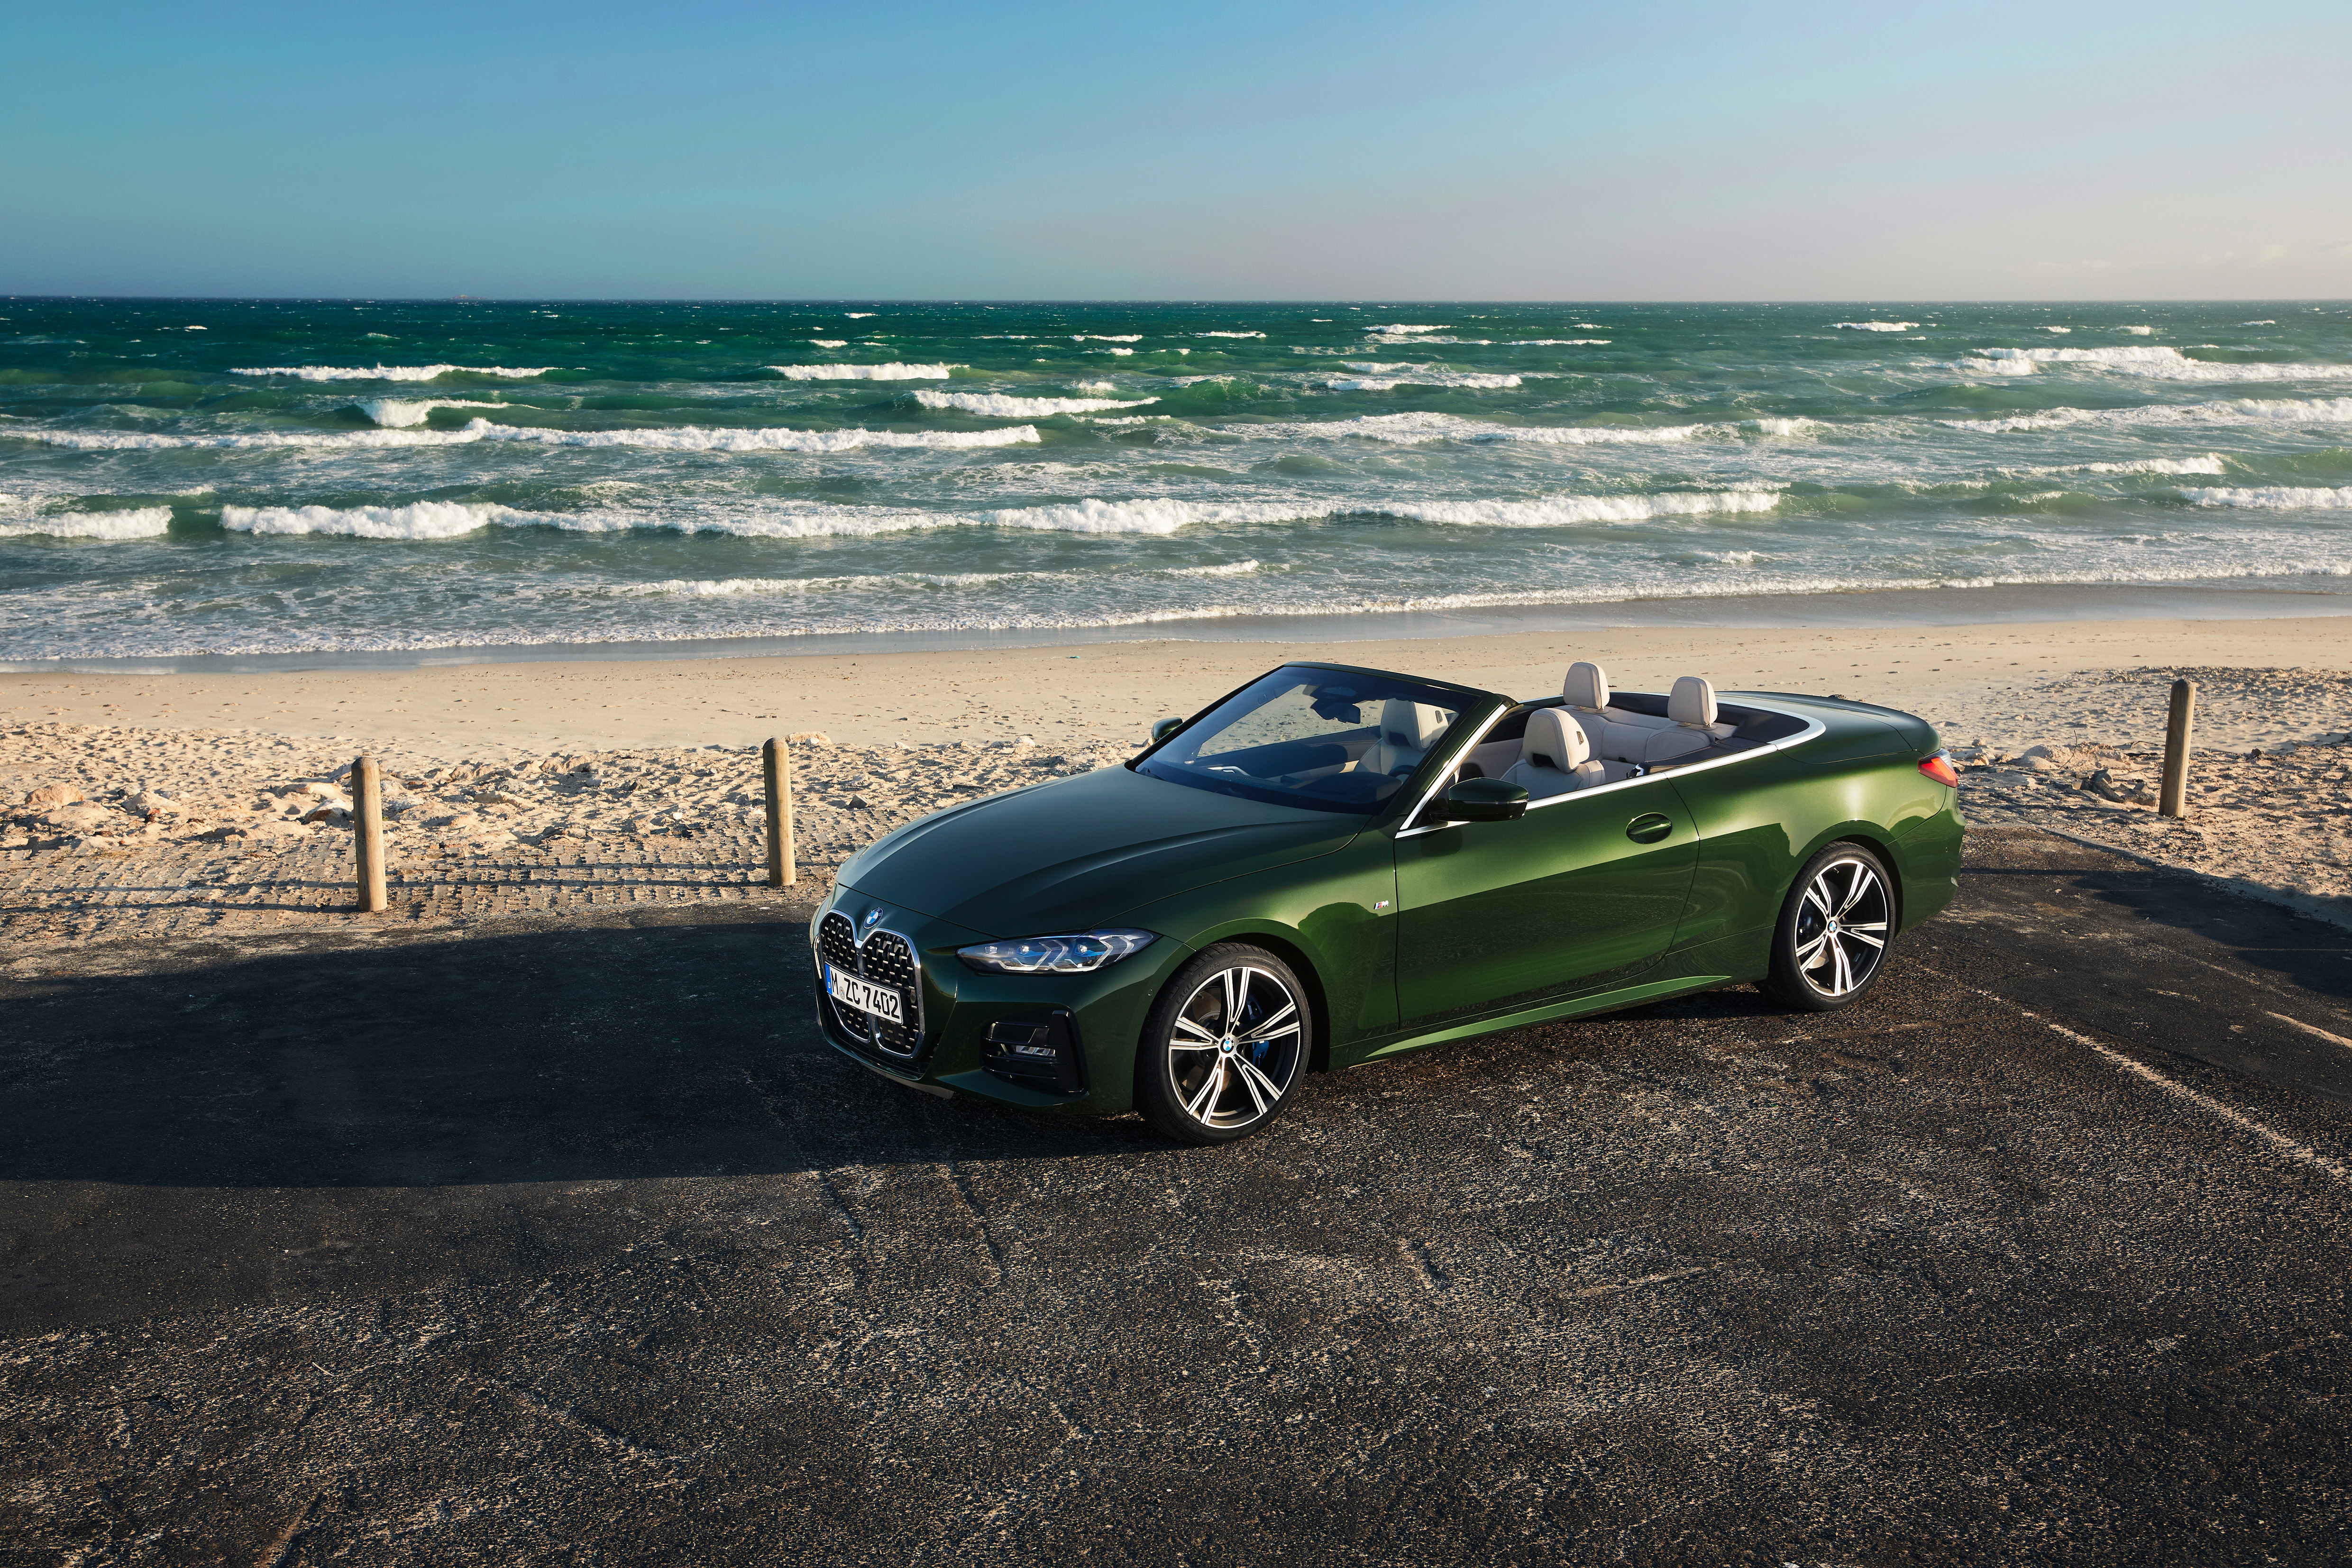 android vehicles, bmw 4 series, bmw, cabriolet, car, green car